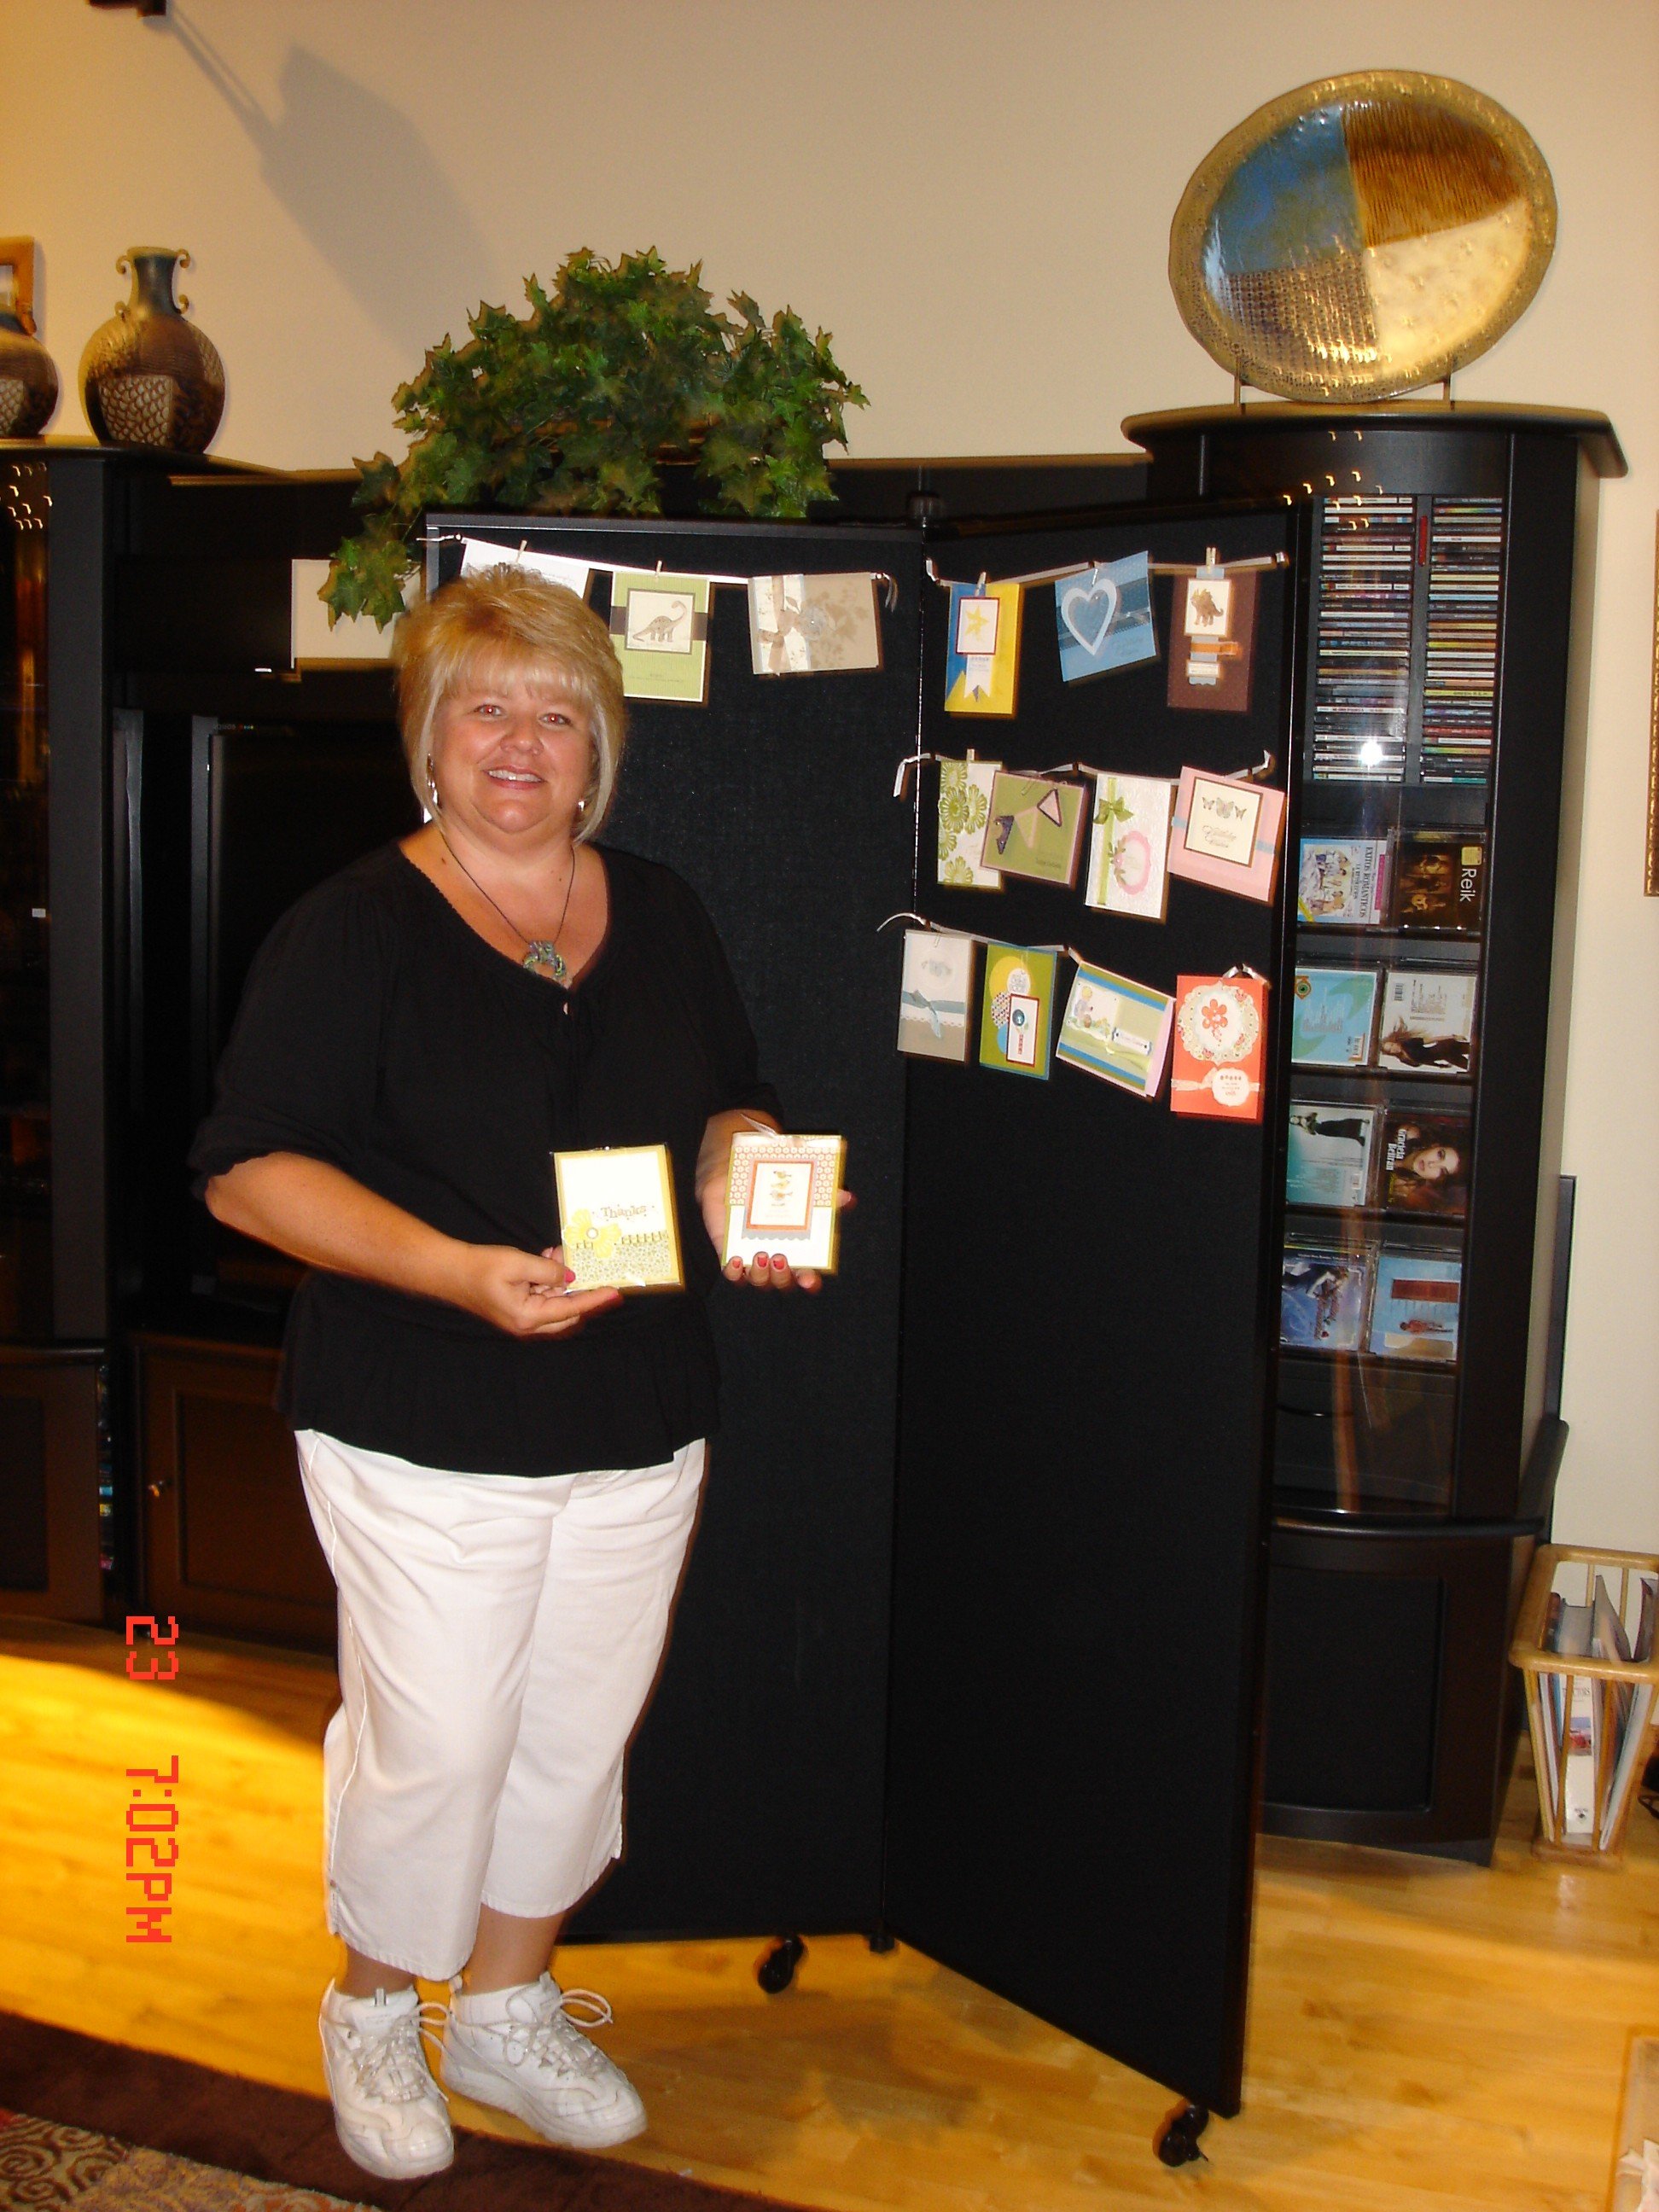 A female hangs homemade Stampin Up cards on a black Screenflex Display unit